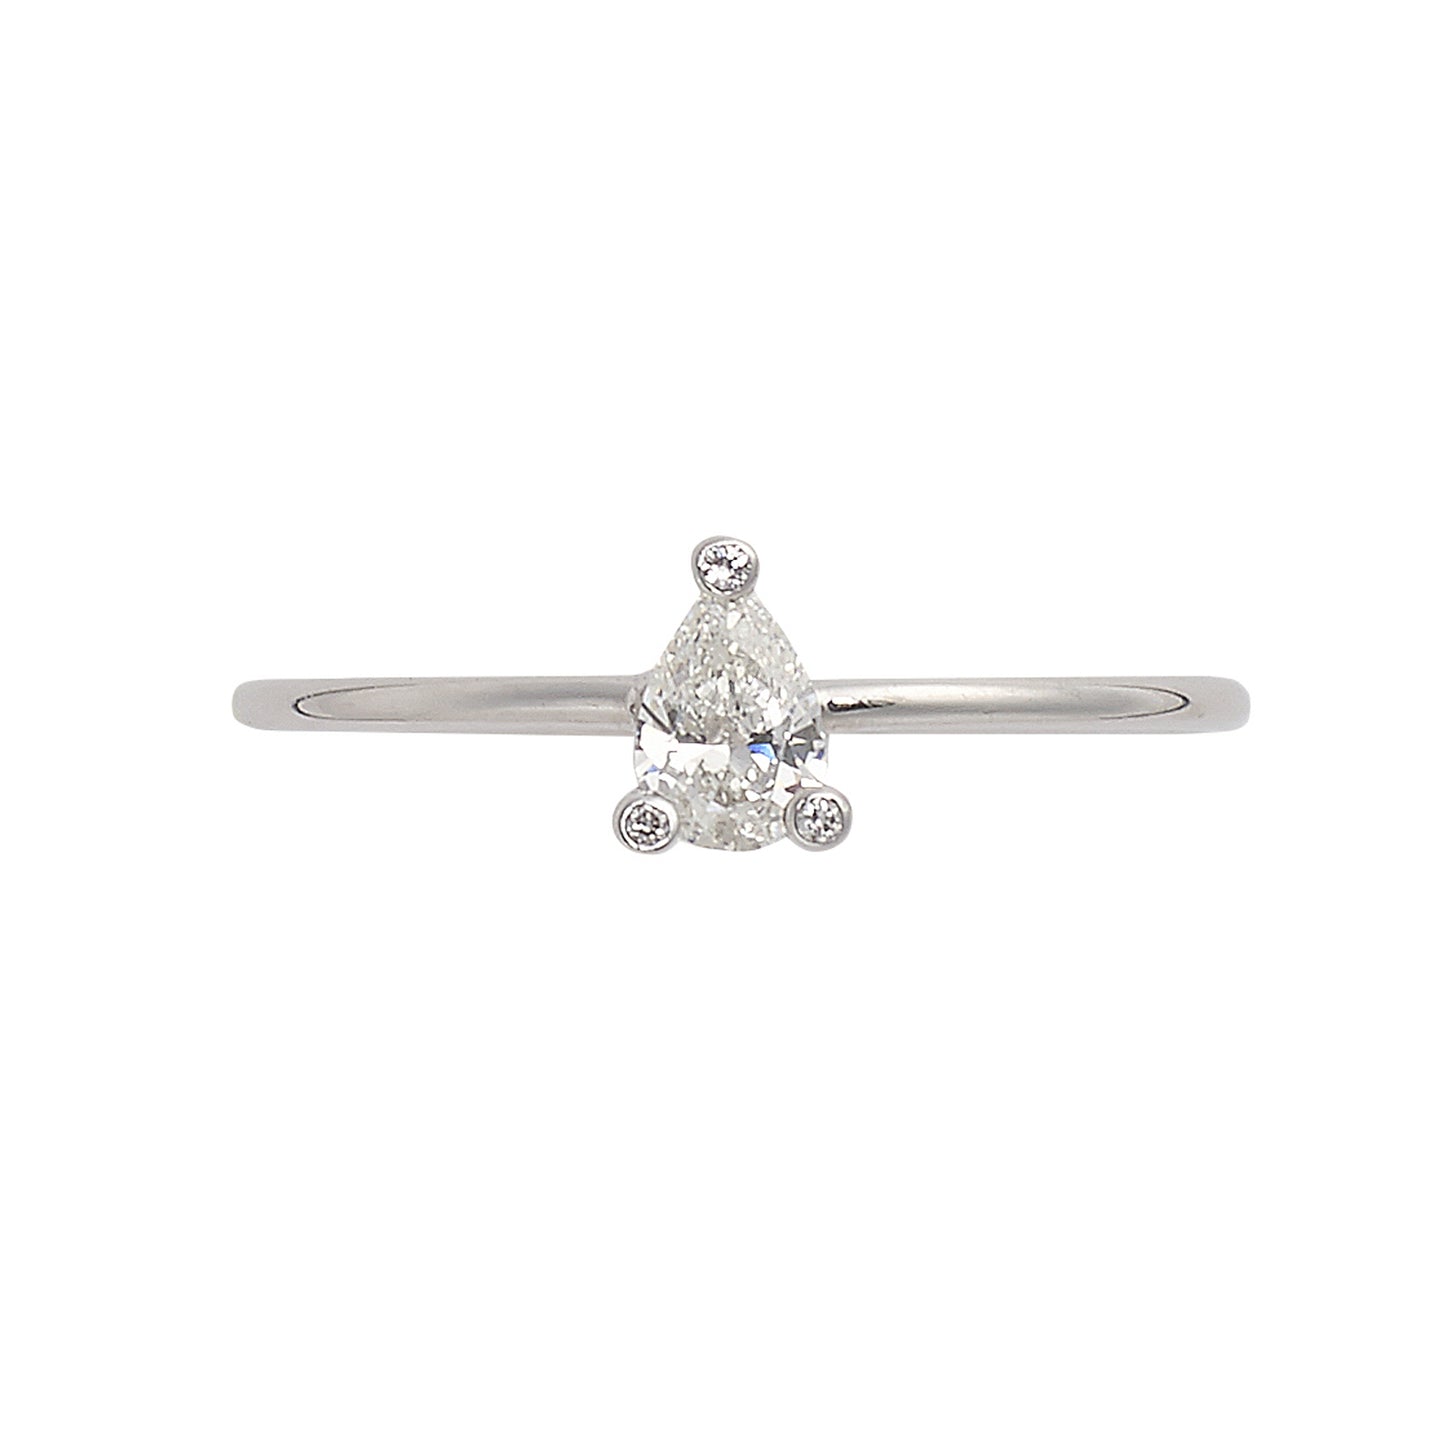 Sweet Pea 18ct white gold engagement ring with claw set pear shaped white diamond and diamond set tips.